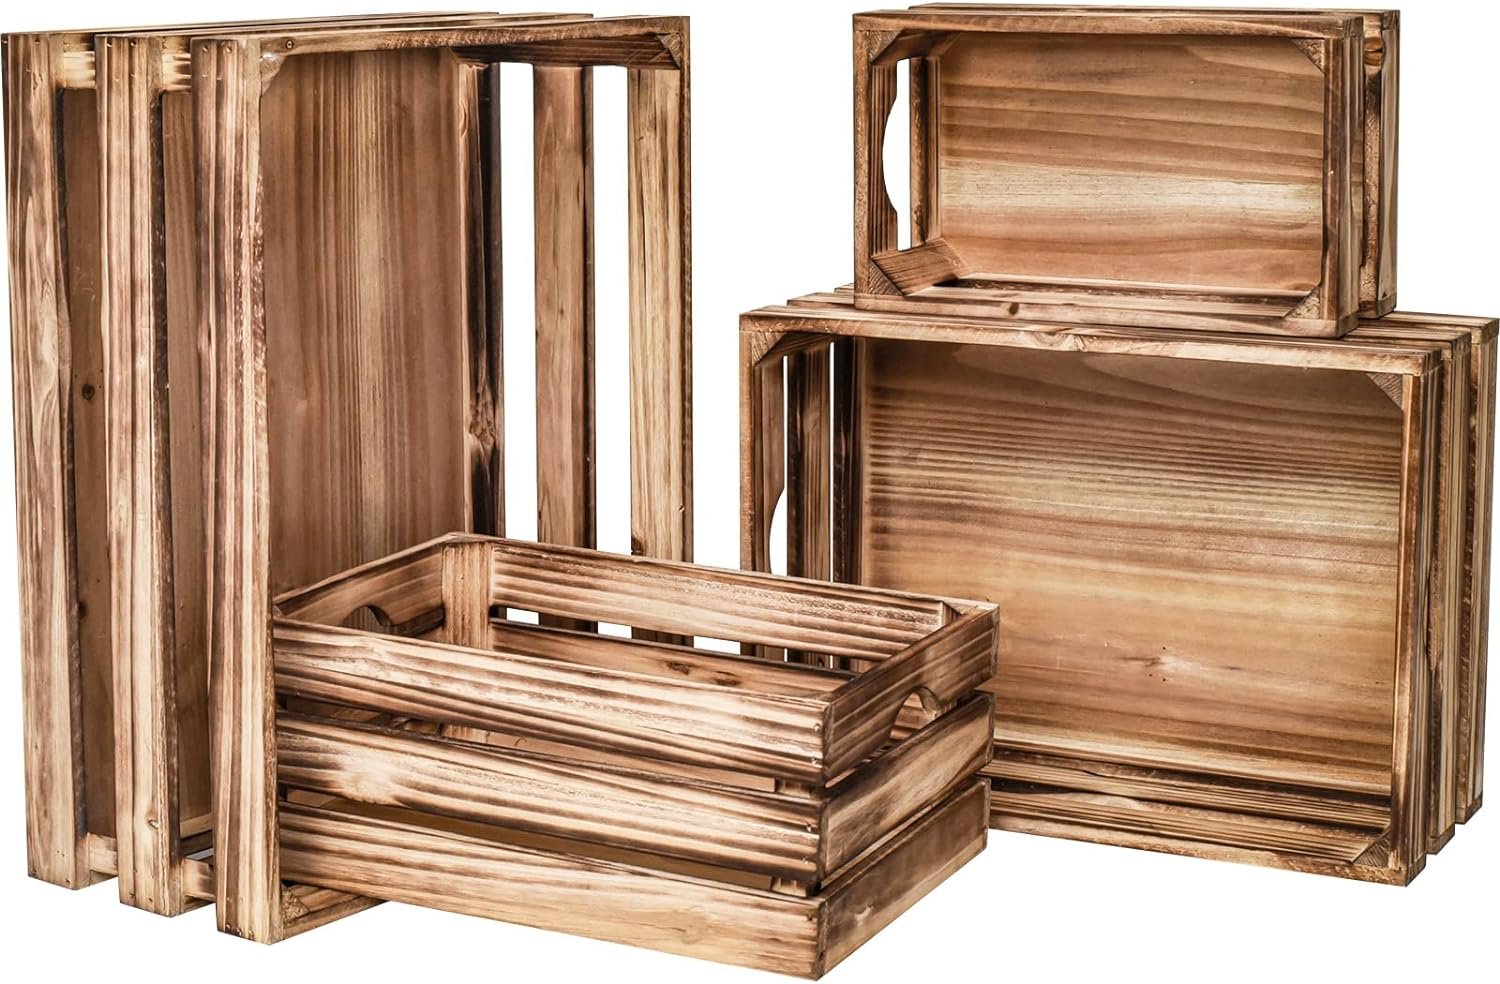 Large Torched Wood Storage Crates Review